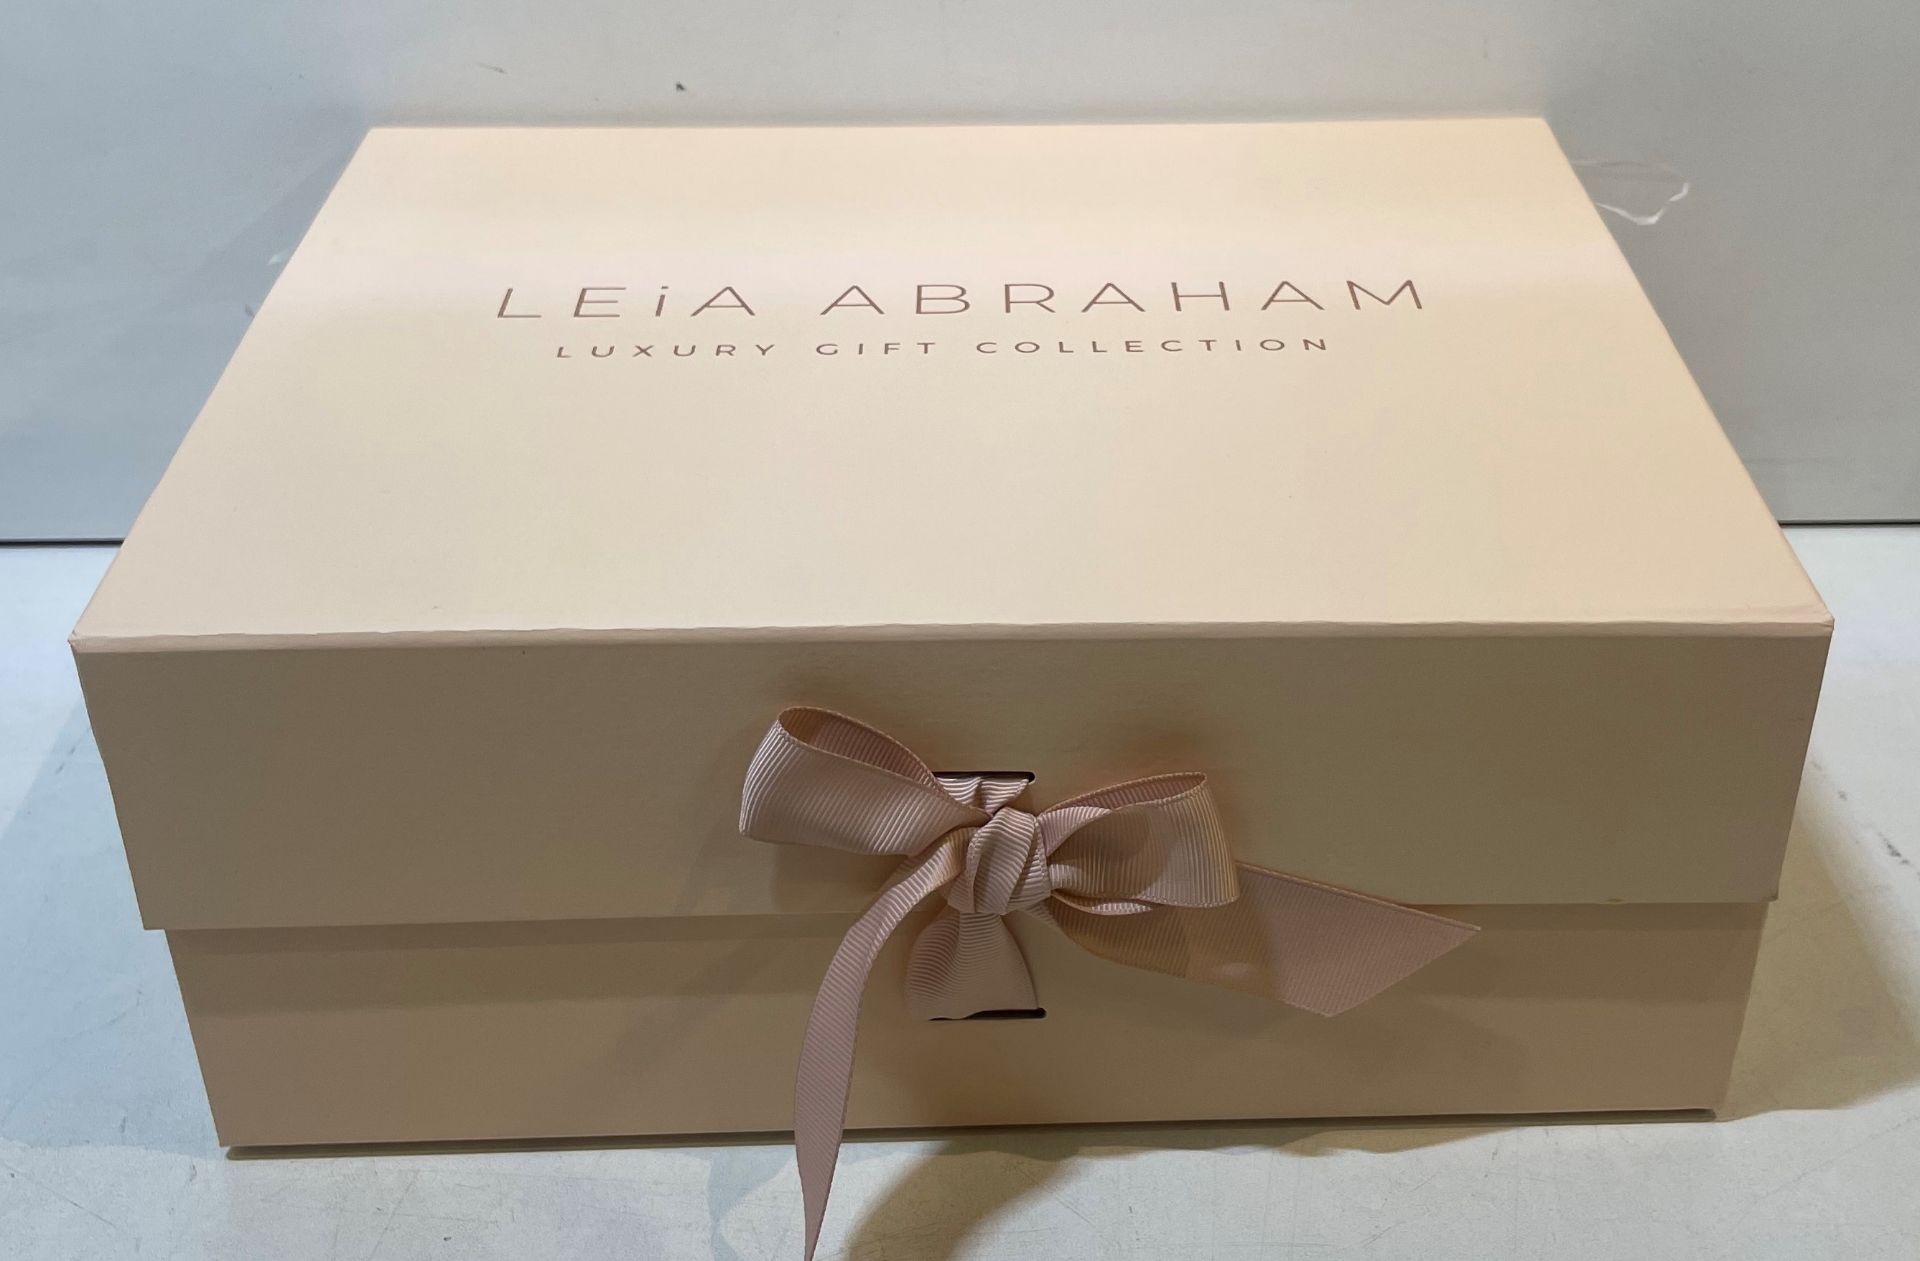 6 x Gift Boxes for Her | Each Box Contains: Handbag, 2 x Jewellery, 2 x Scented Candles, Soap, Bath - Image 2 of 11